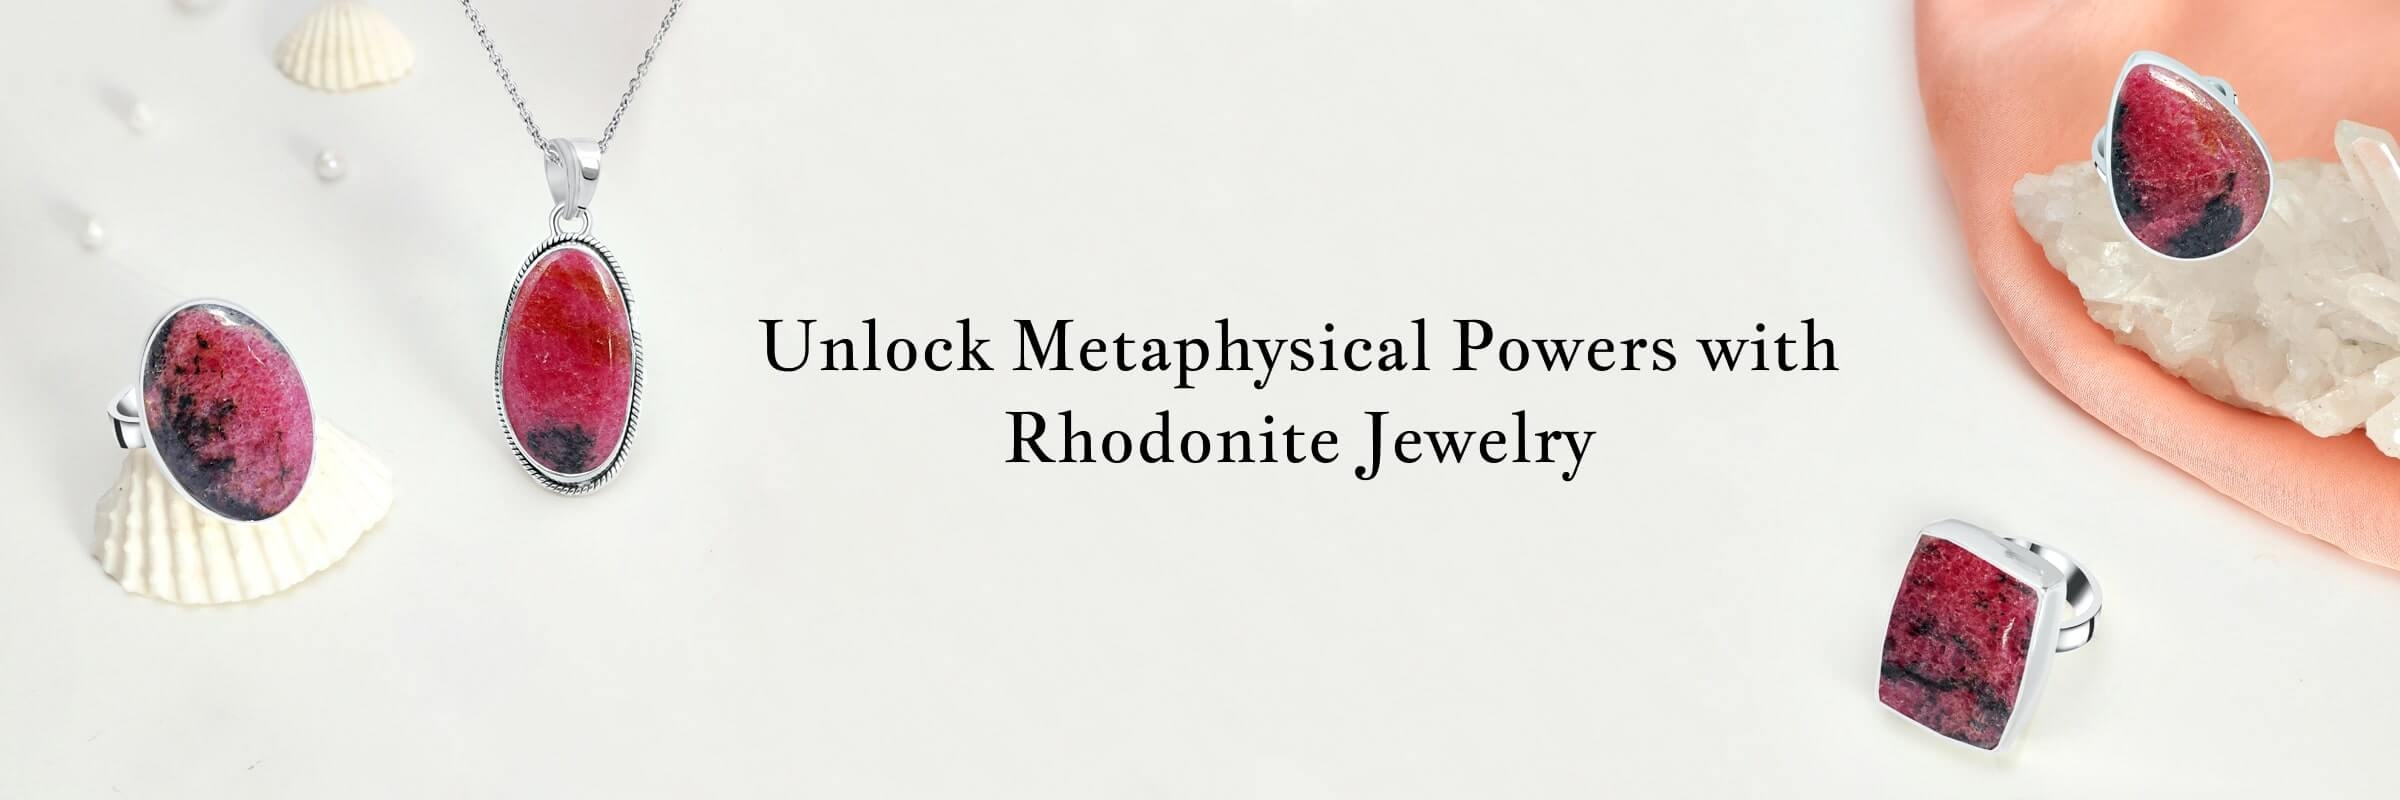 Metaphysical Properties Derived from Rhodonite Jewelry